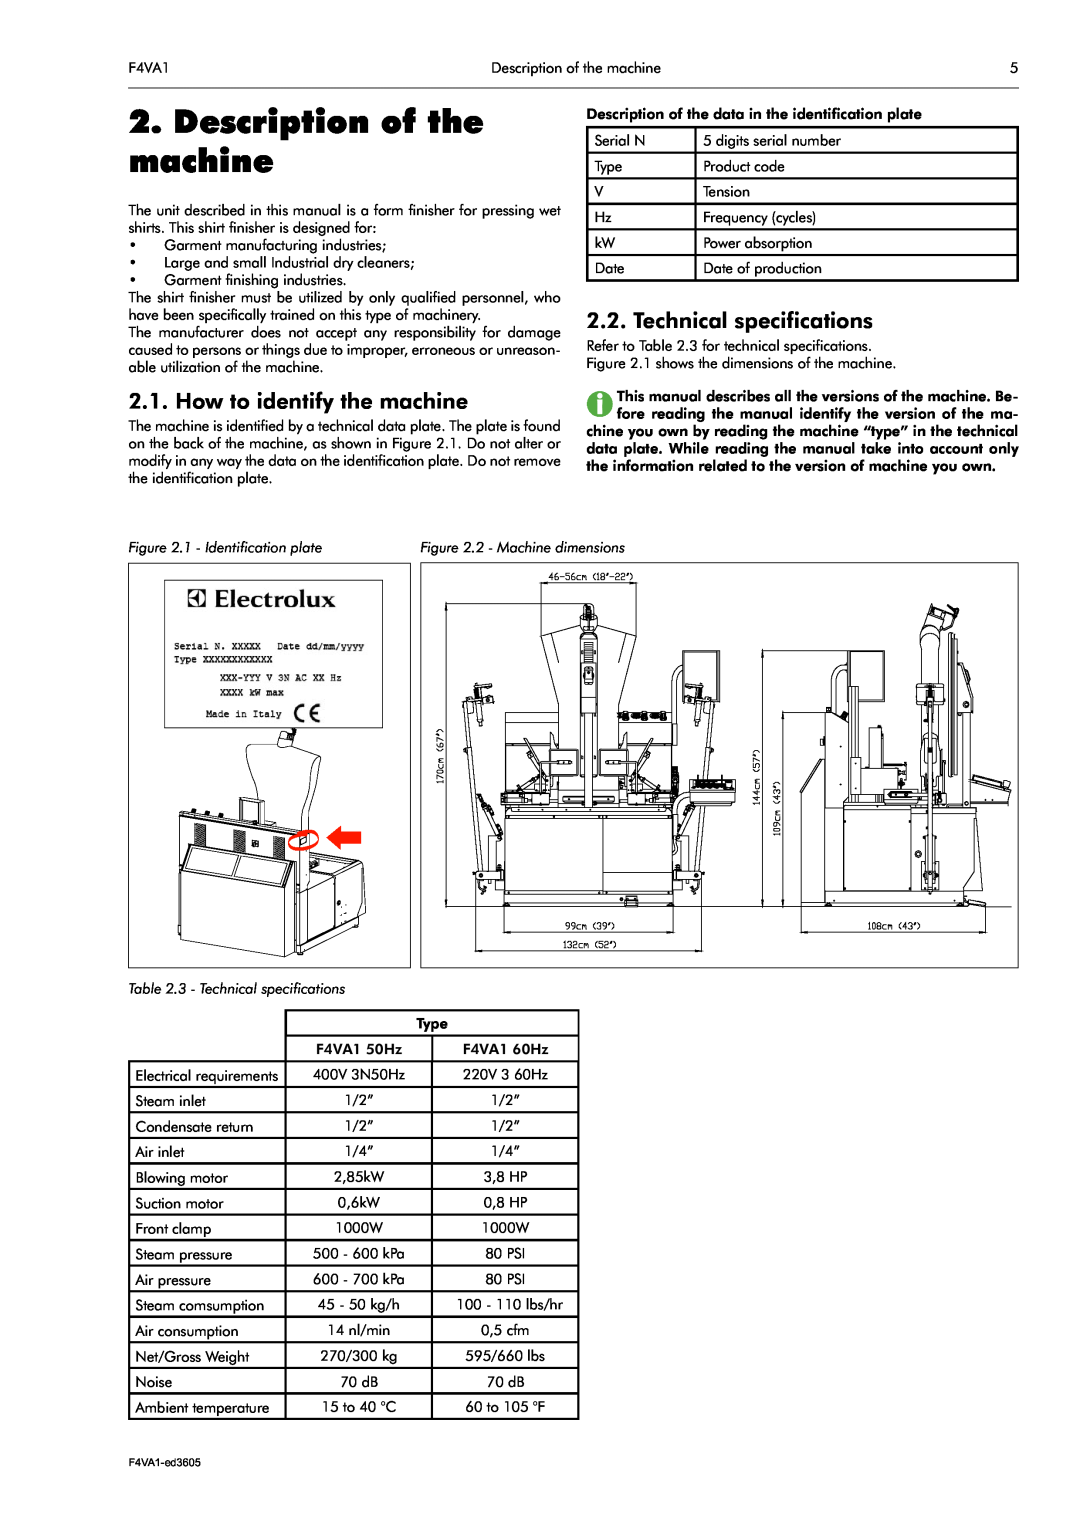 Electrolux F4VA1 Description of the machine, How to identify the machine, Technical specifications, 2 - Machine dimensions 